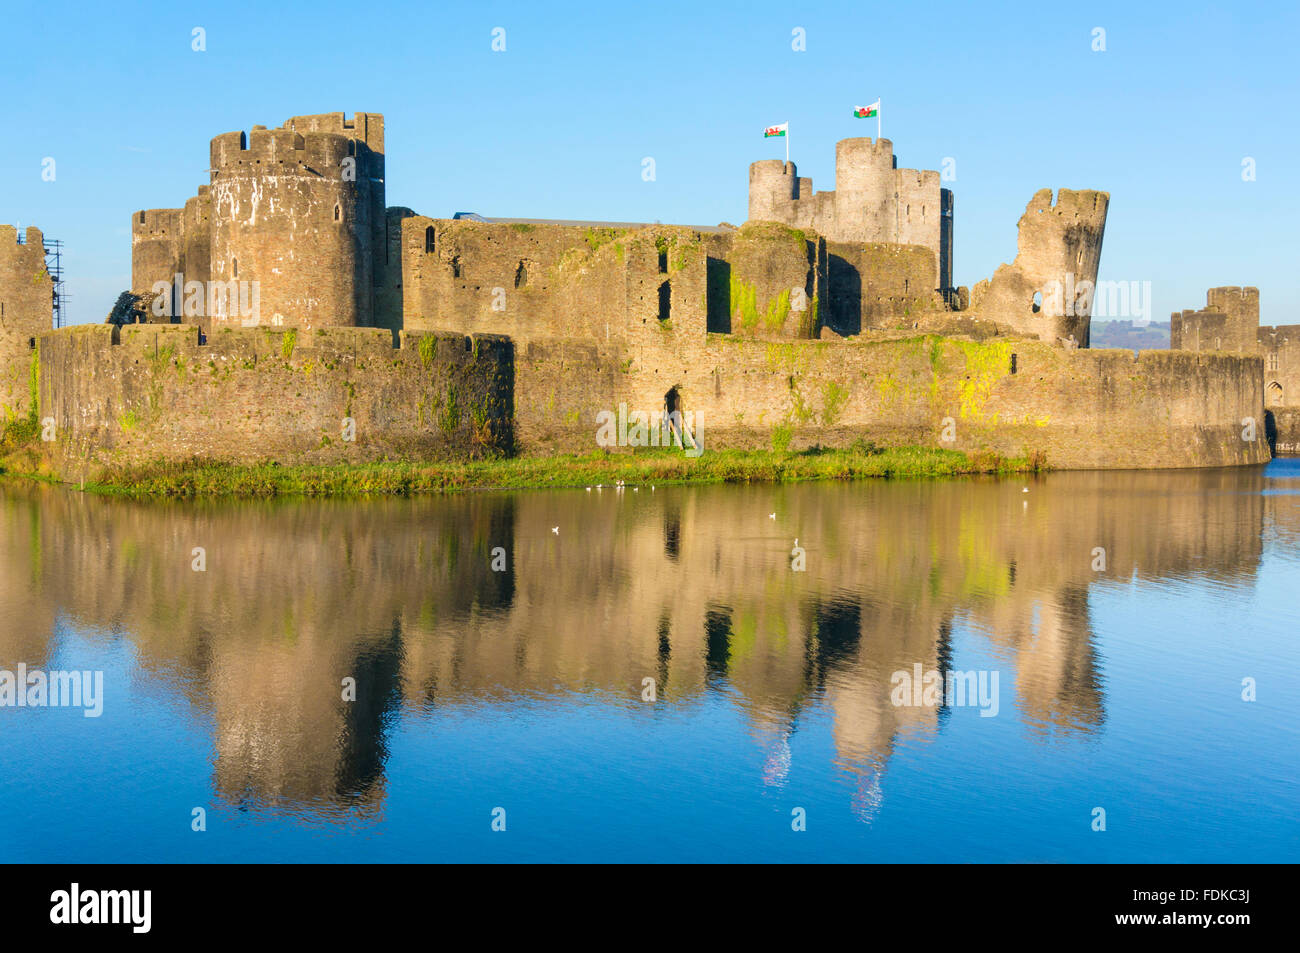 Welsh flags flying above Caerphilly castle a Medieval castle with moat in Caerphilly Glamorgan South Wales GB UK EU Europe Stock Photo